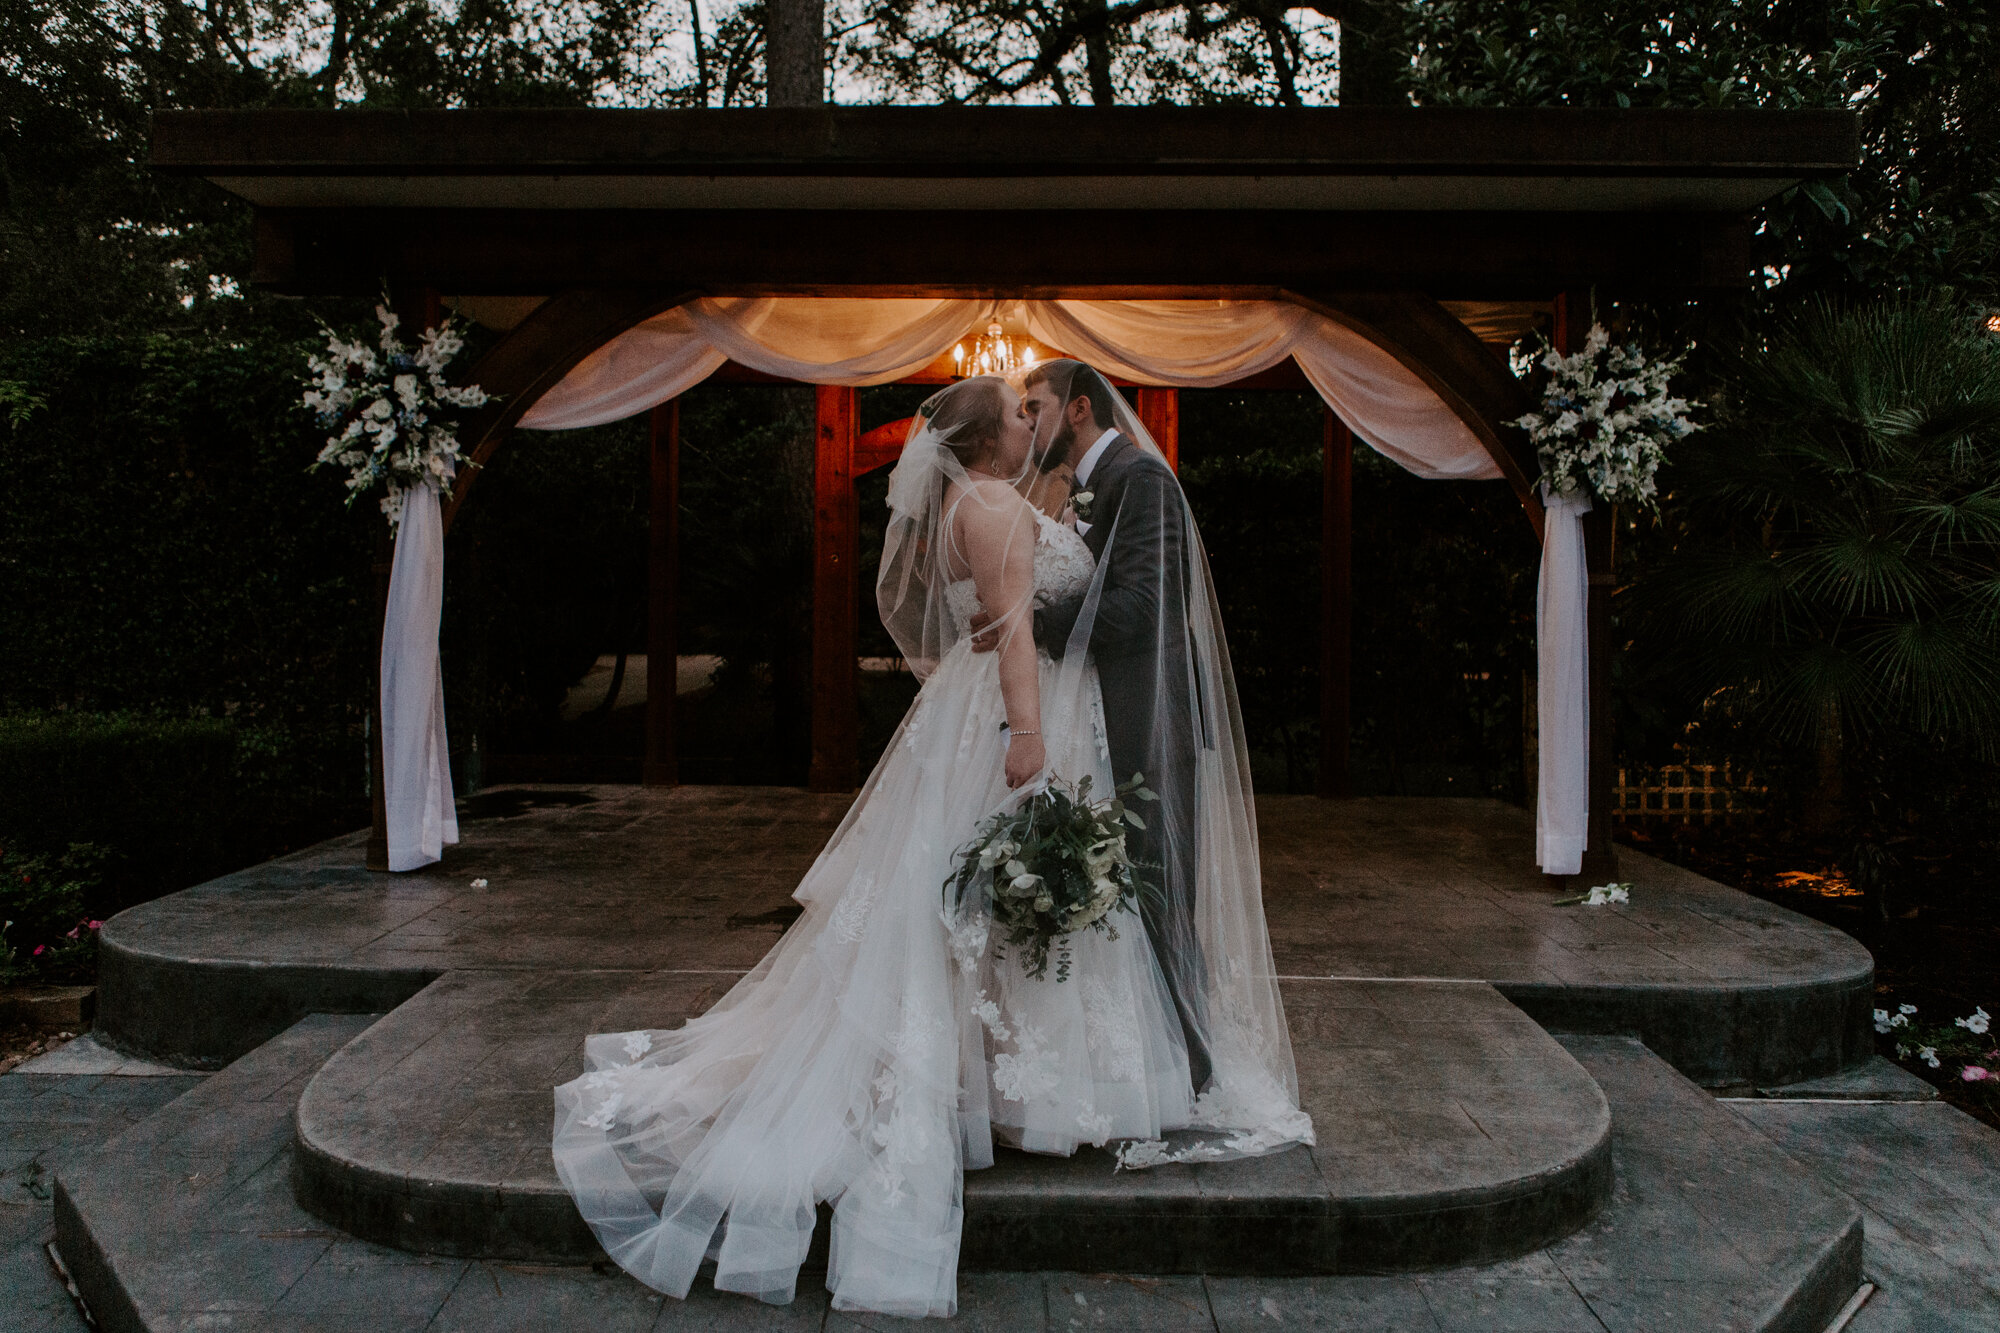 Bride and groom kissing under veil in the gazebo. Romantic Sunset Wedding at Shirley Acres